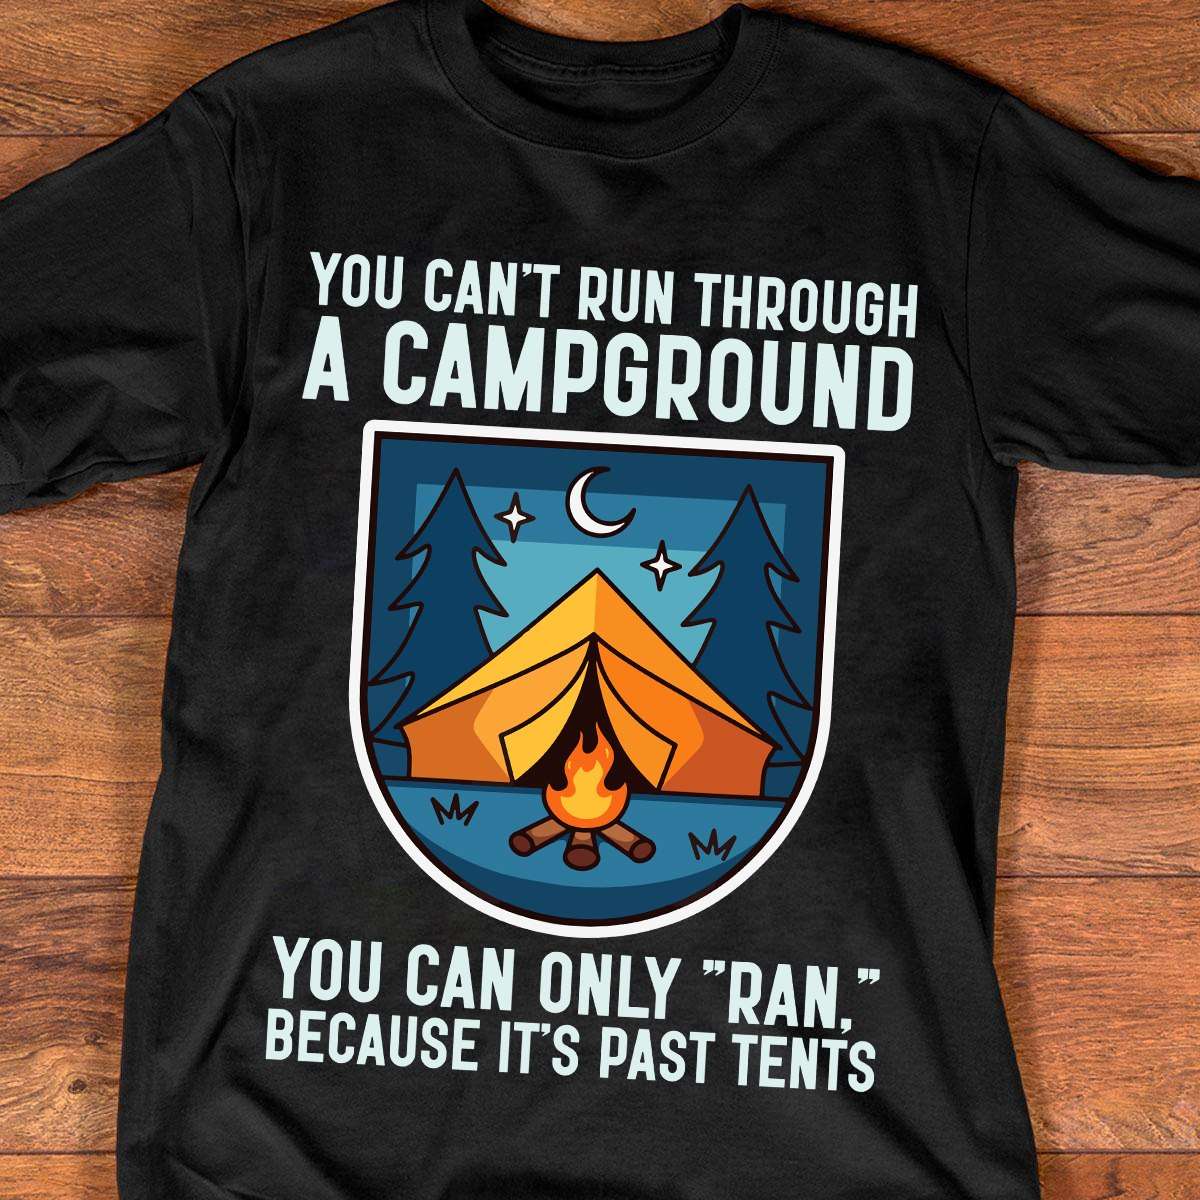 You can't run through a campground, you can only ran, because it's past tents - Camping the hobby